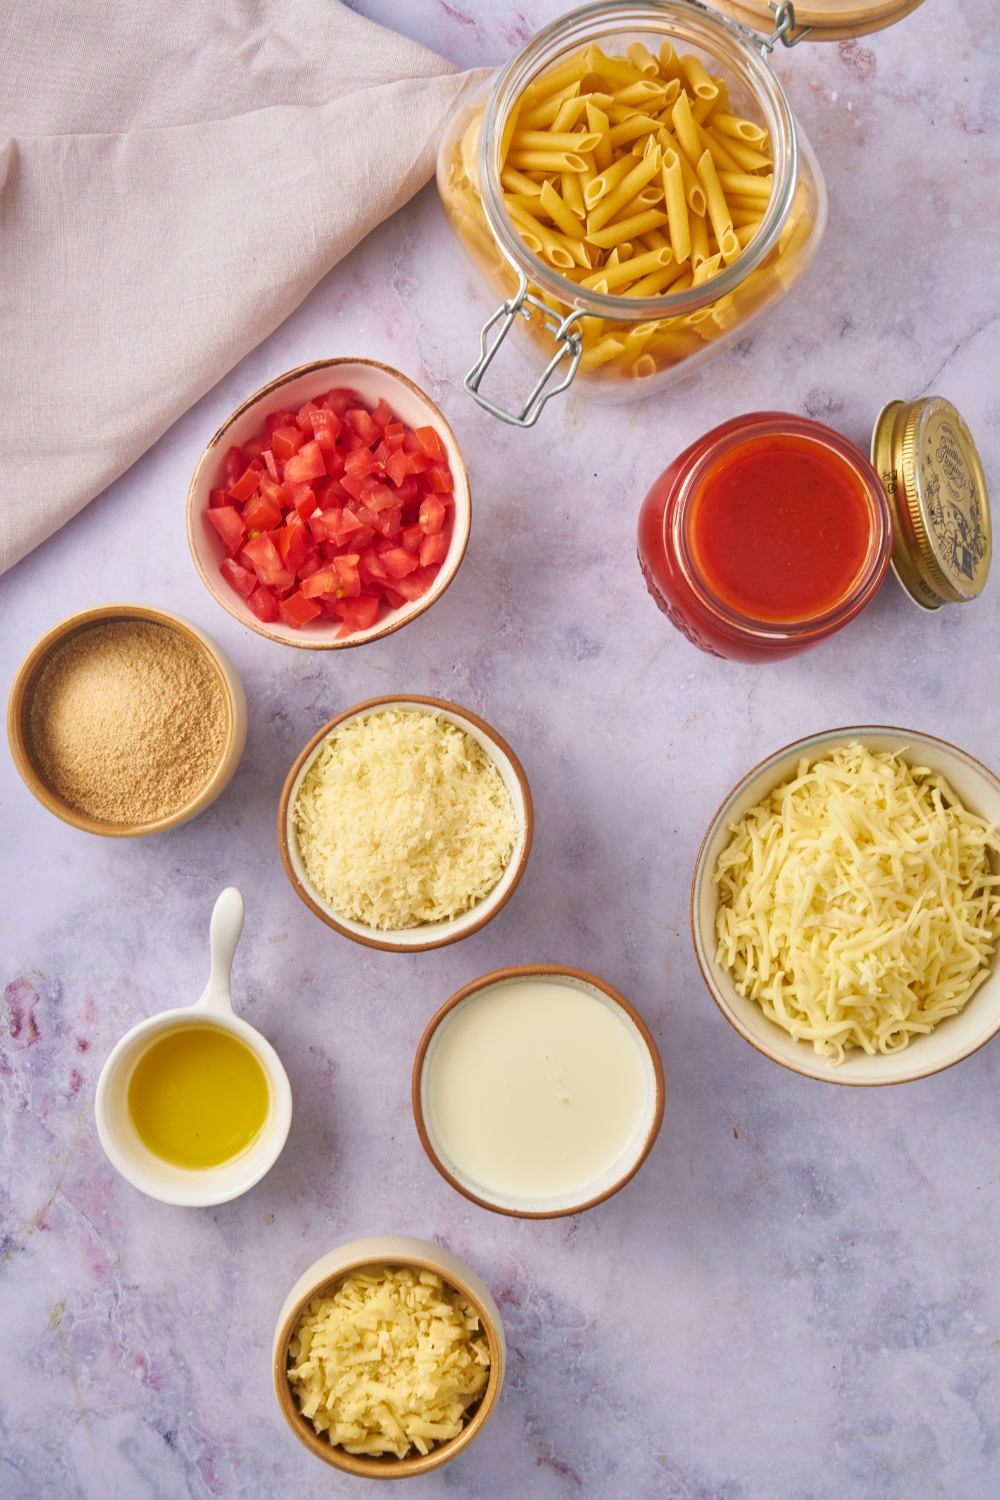 Overhead view of an assortment of ingredients including bowls of marinara sauce, diced tomatoes, dried pasta, shredded cheese, cream, and bread crumbs.